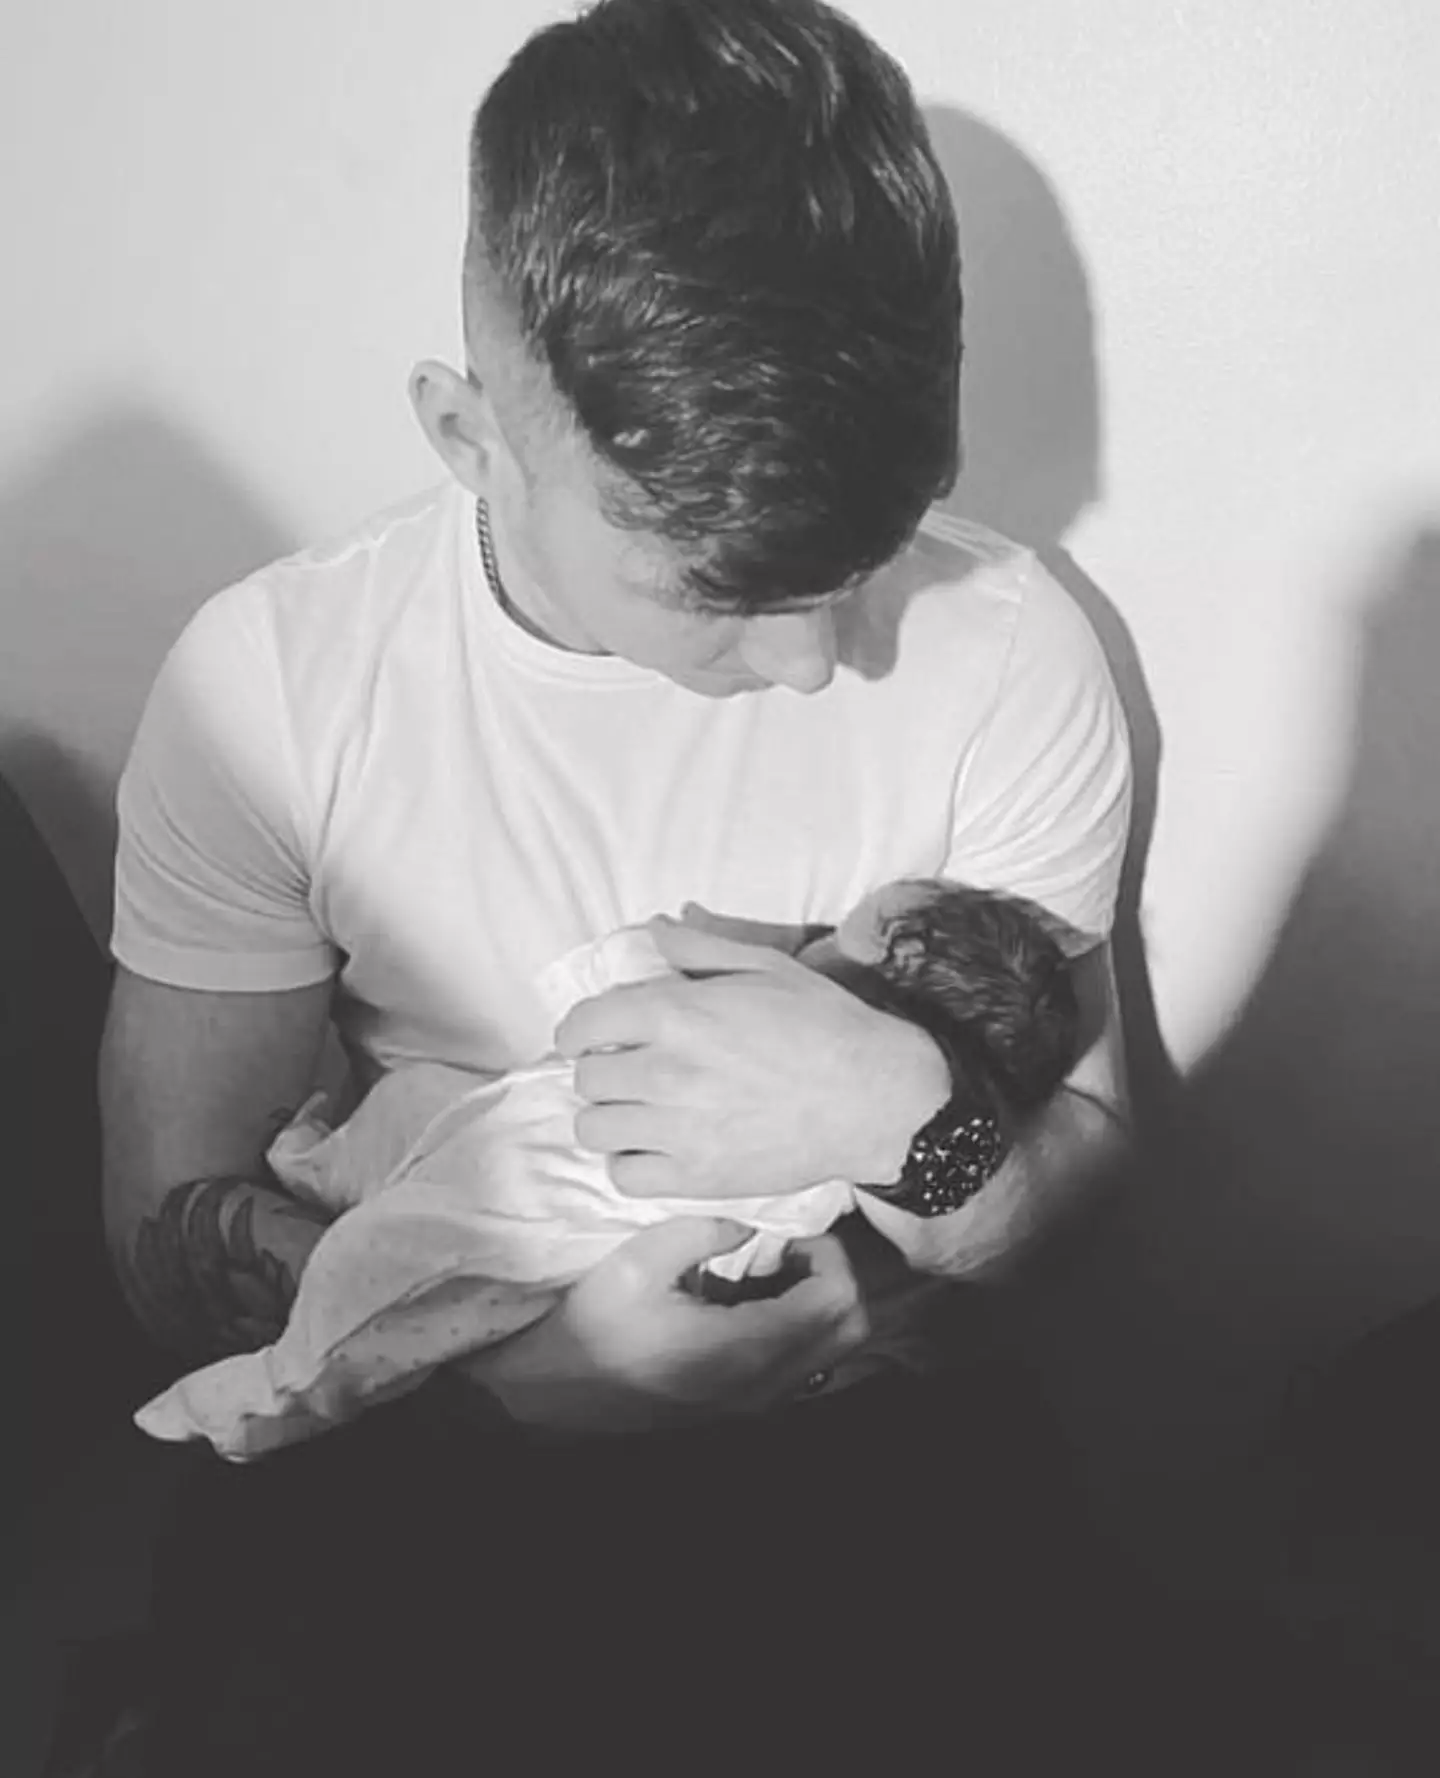 Jack Keating shared a photo of his newborn daughter.